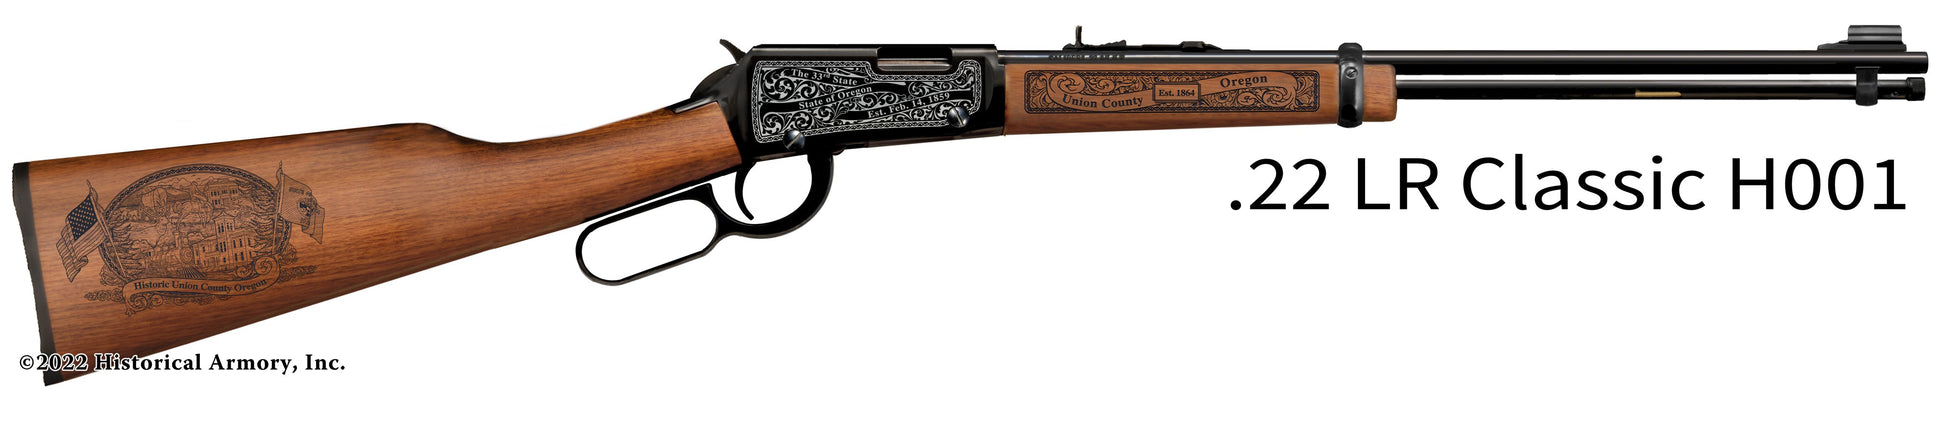 Union County Oregon Engraved Henry H001 Rifle